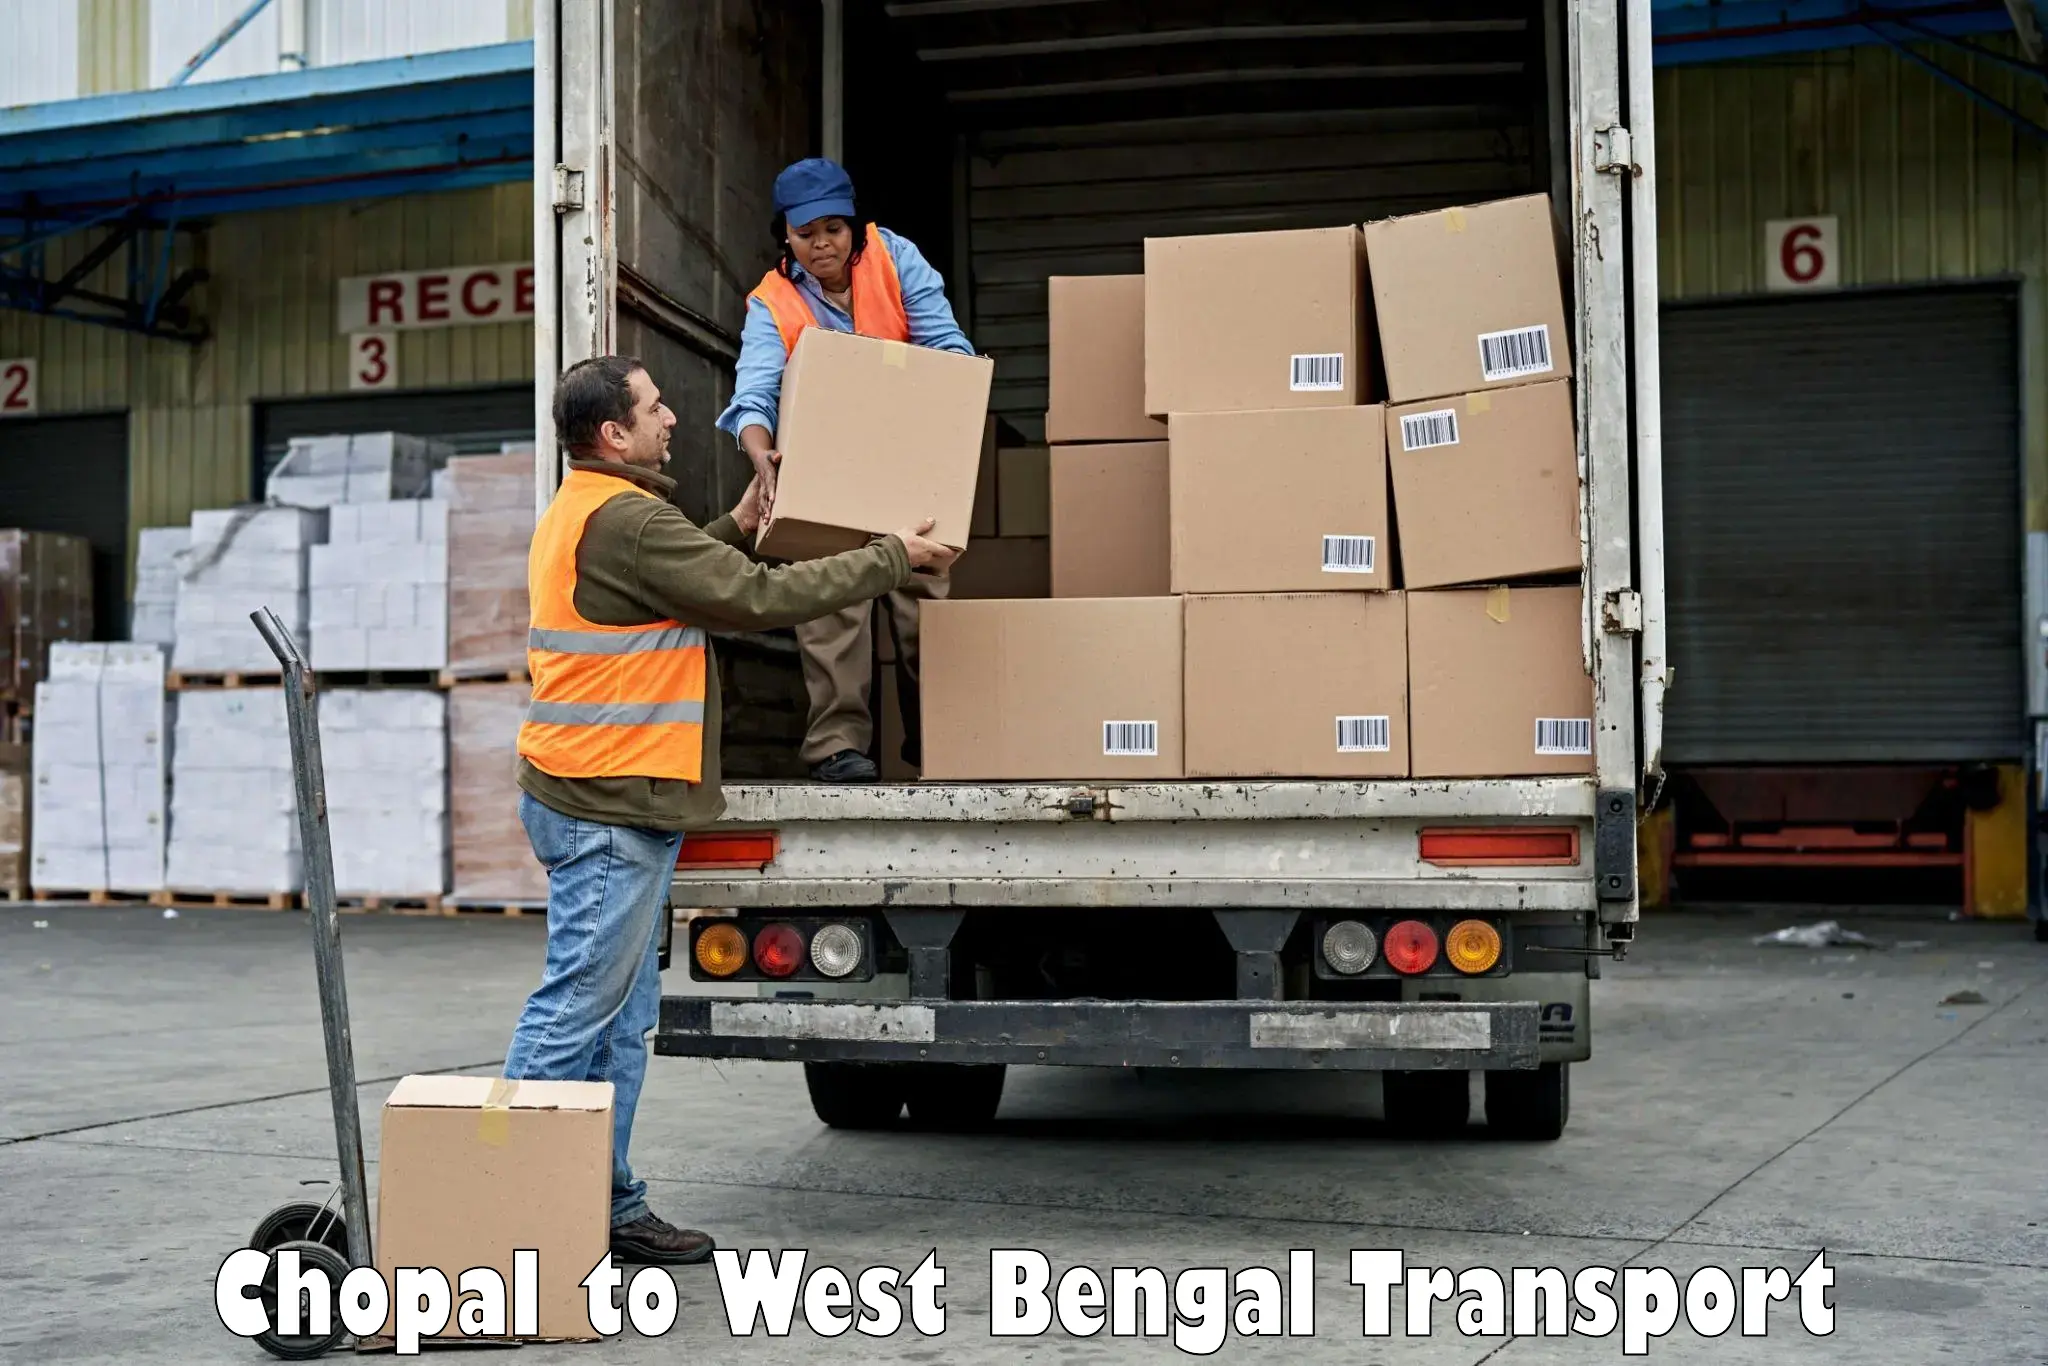 Truck transport companies in India Chopal to South 24 Parganas